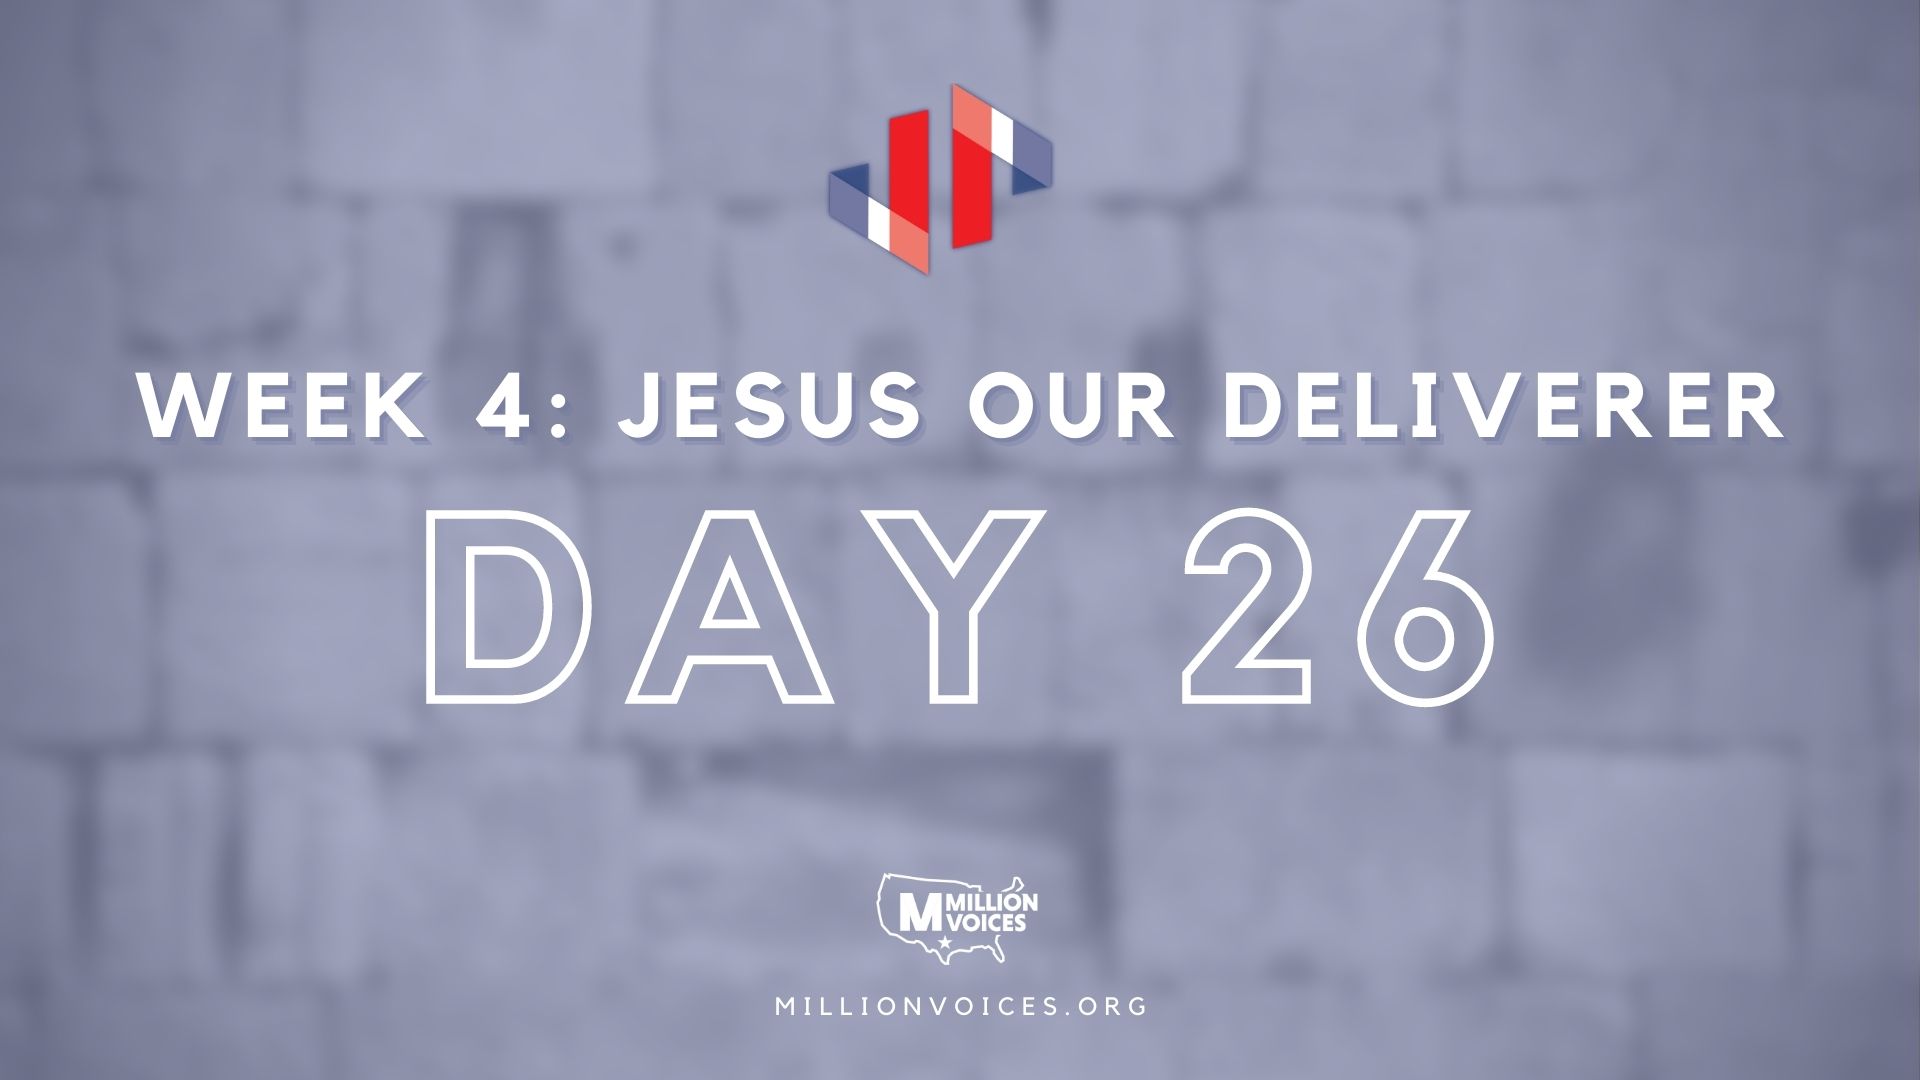 Million Voices - Pause to Pray Images Day 26